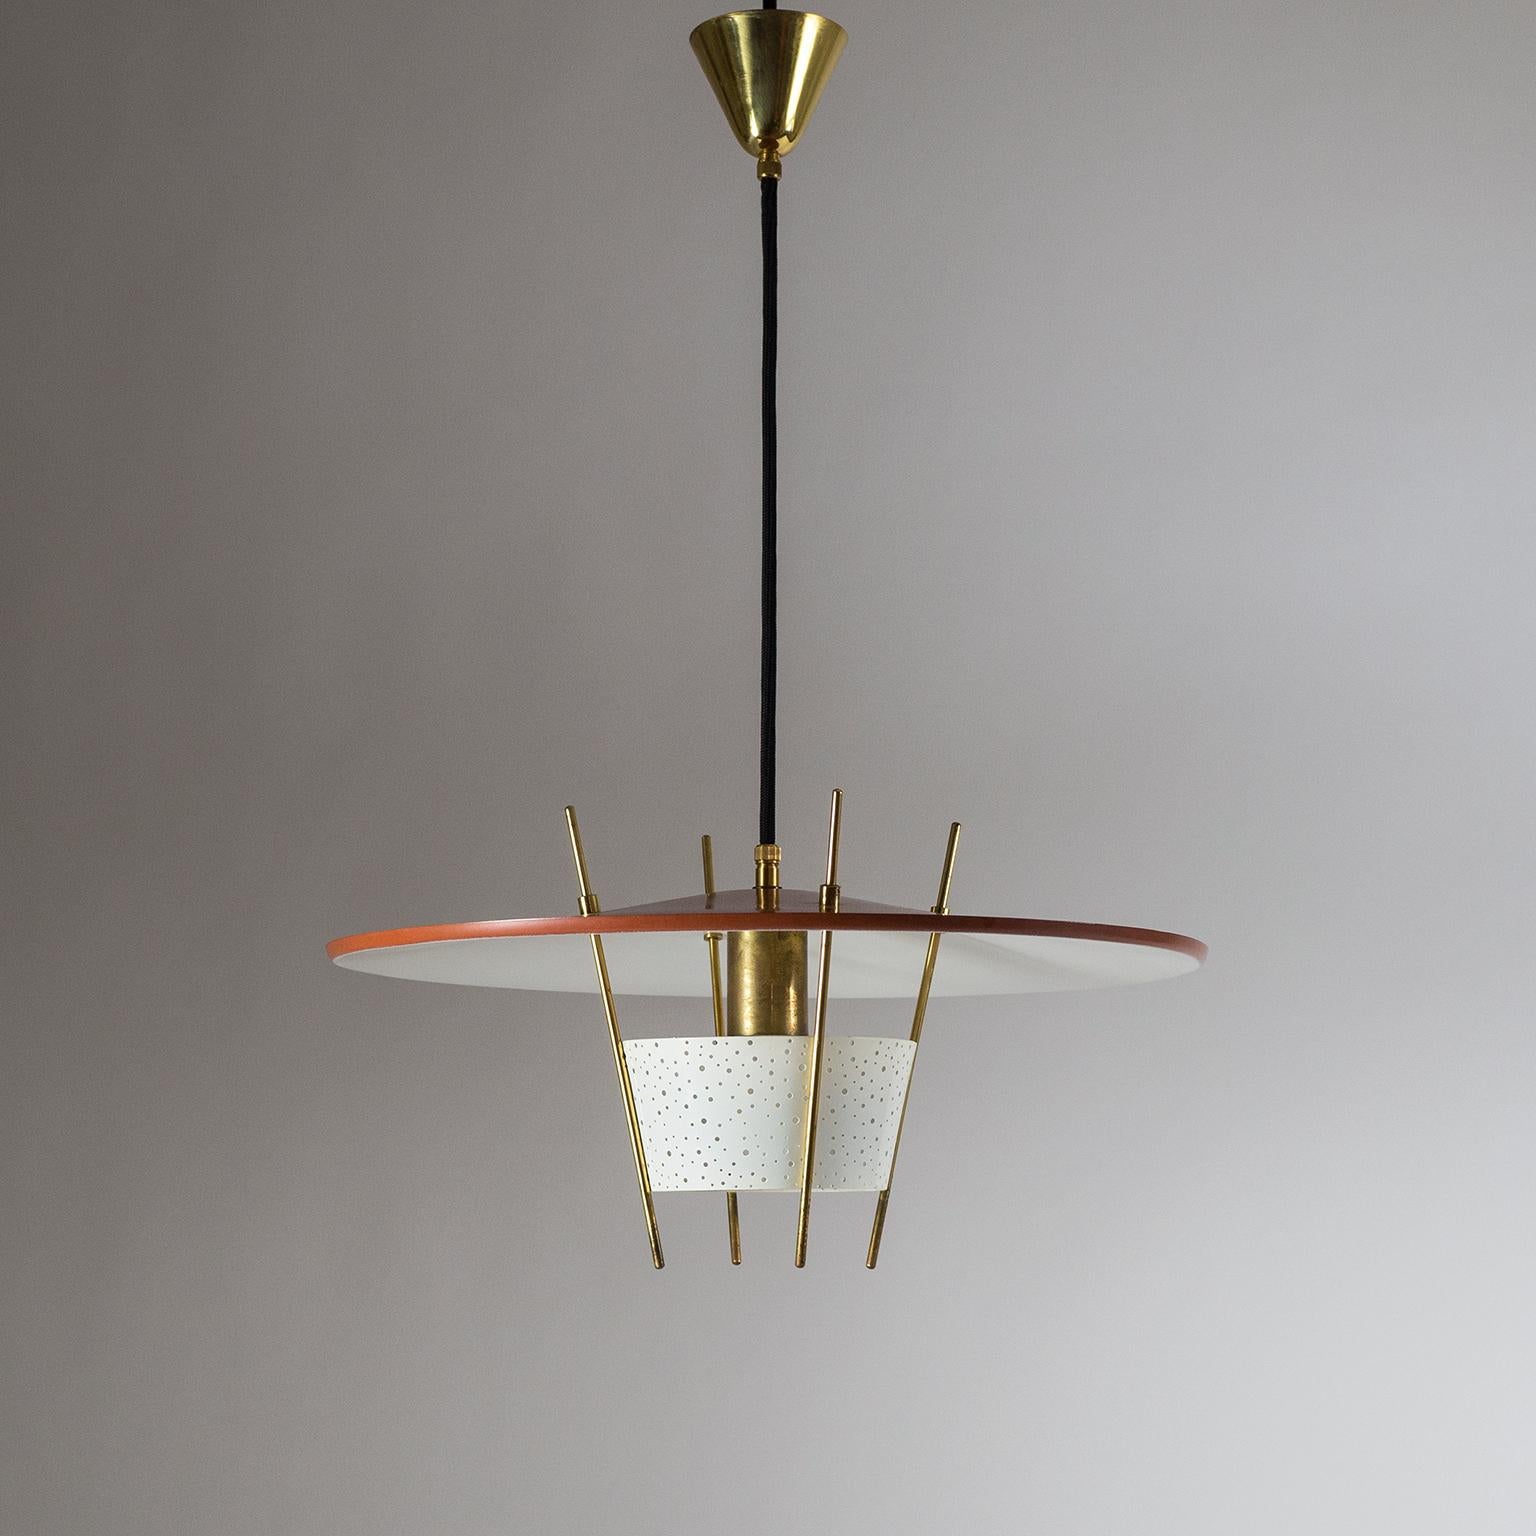 Unique and very rare pendant by Ernest Igl for Hillebrand, Germany 1950s. A densely perforated diffuser with holes of varying sizes is attached to the large dual-color shade with brass stems in an ingenious manner. Very fine original condition with